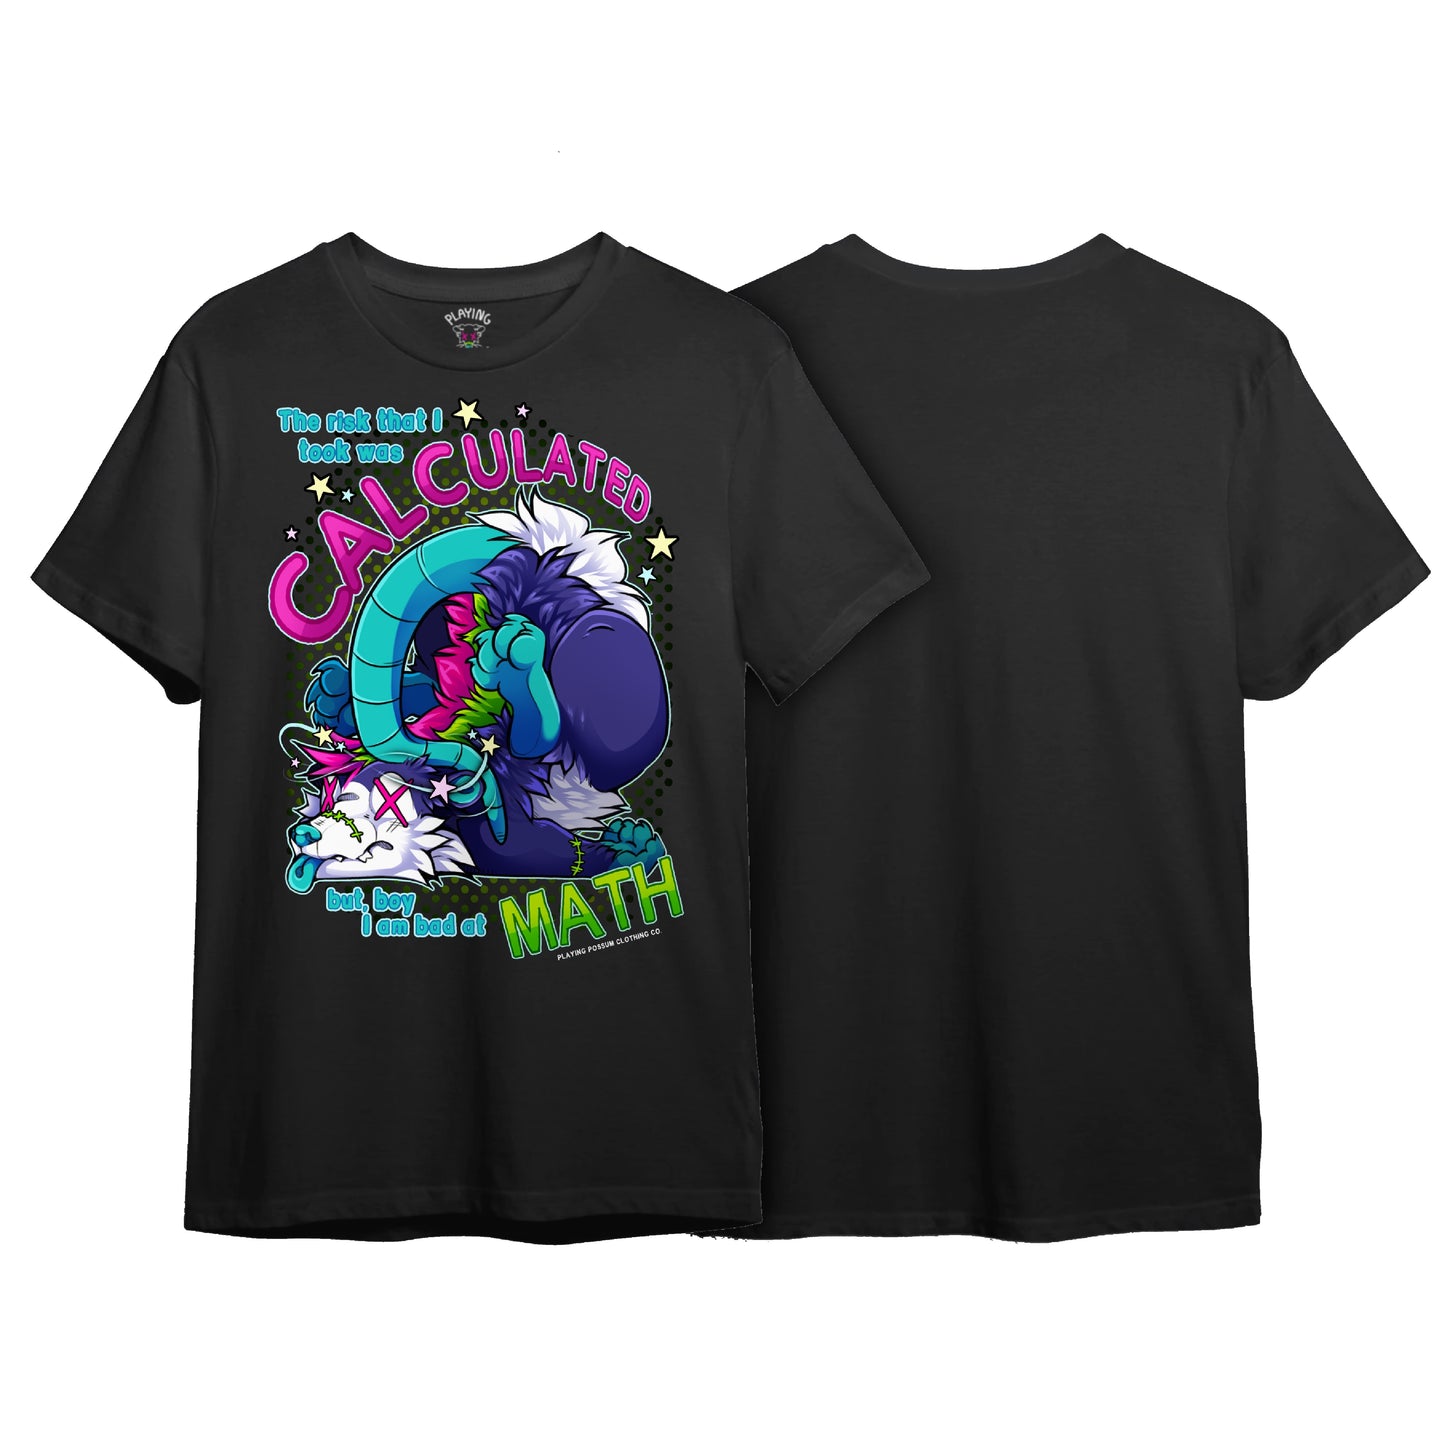 Calculated Risk T-Shirt